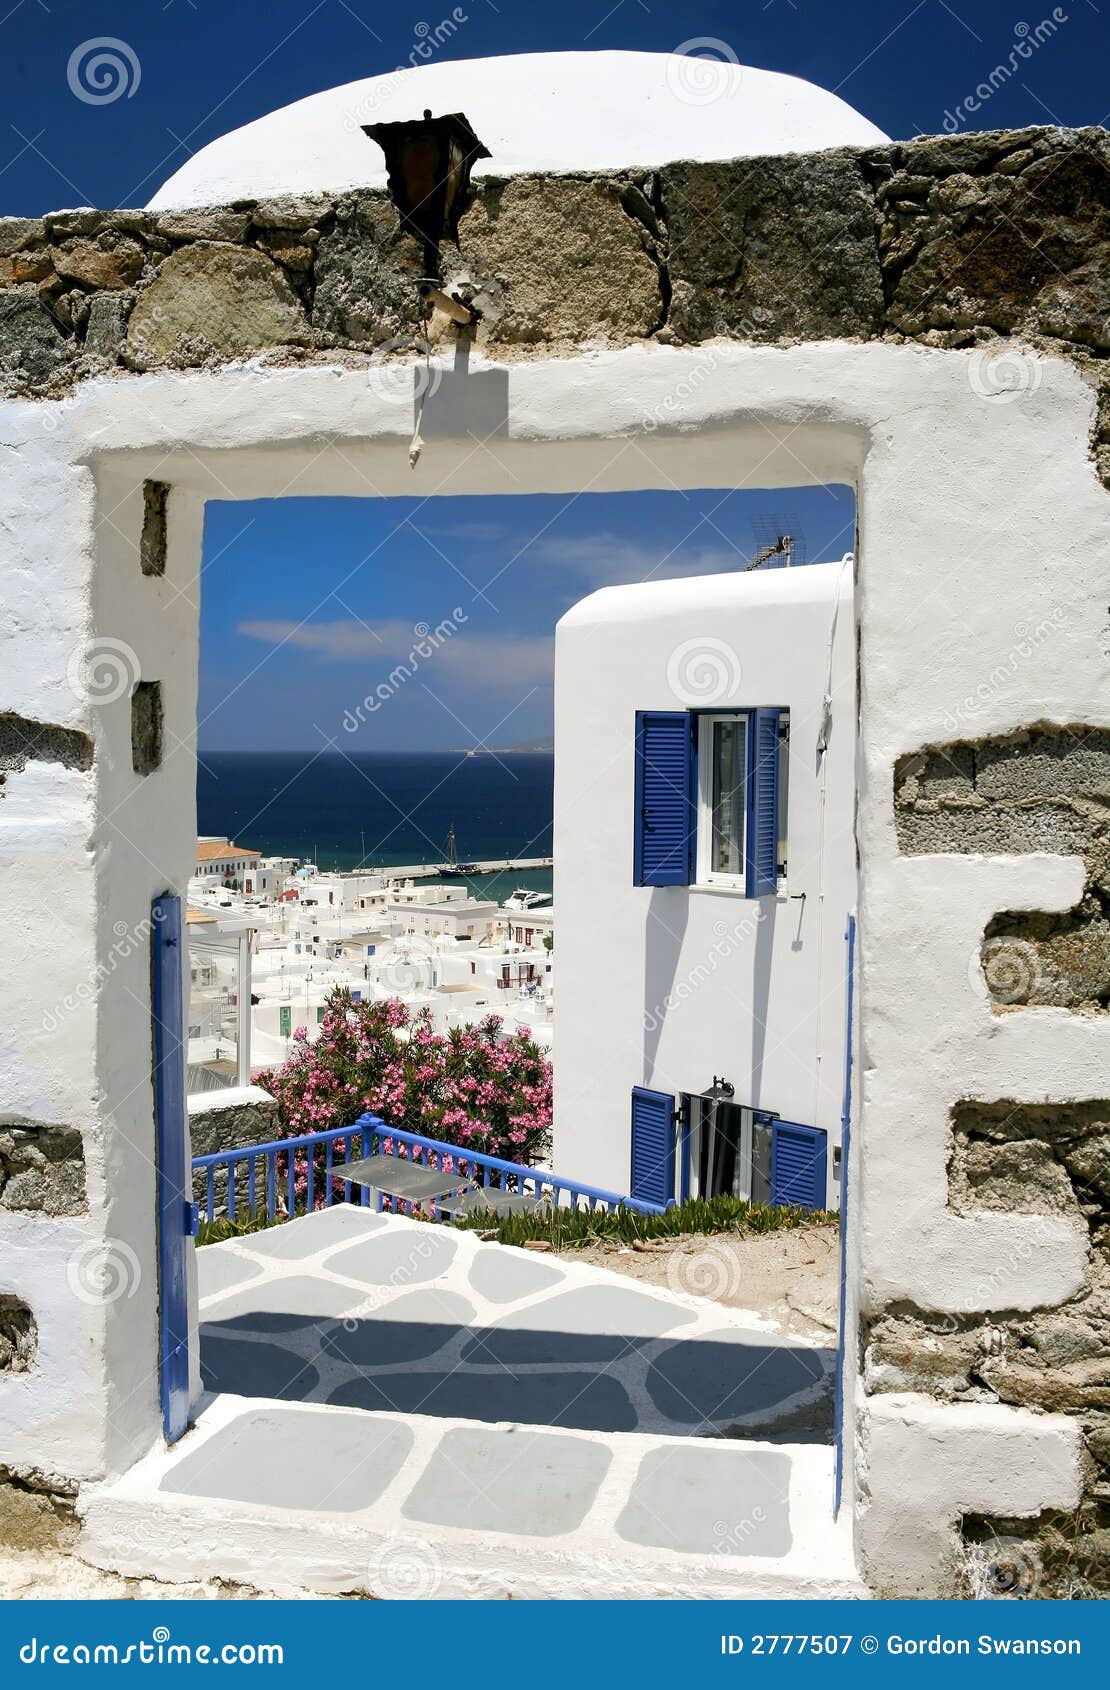 day in mikonos